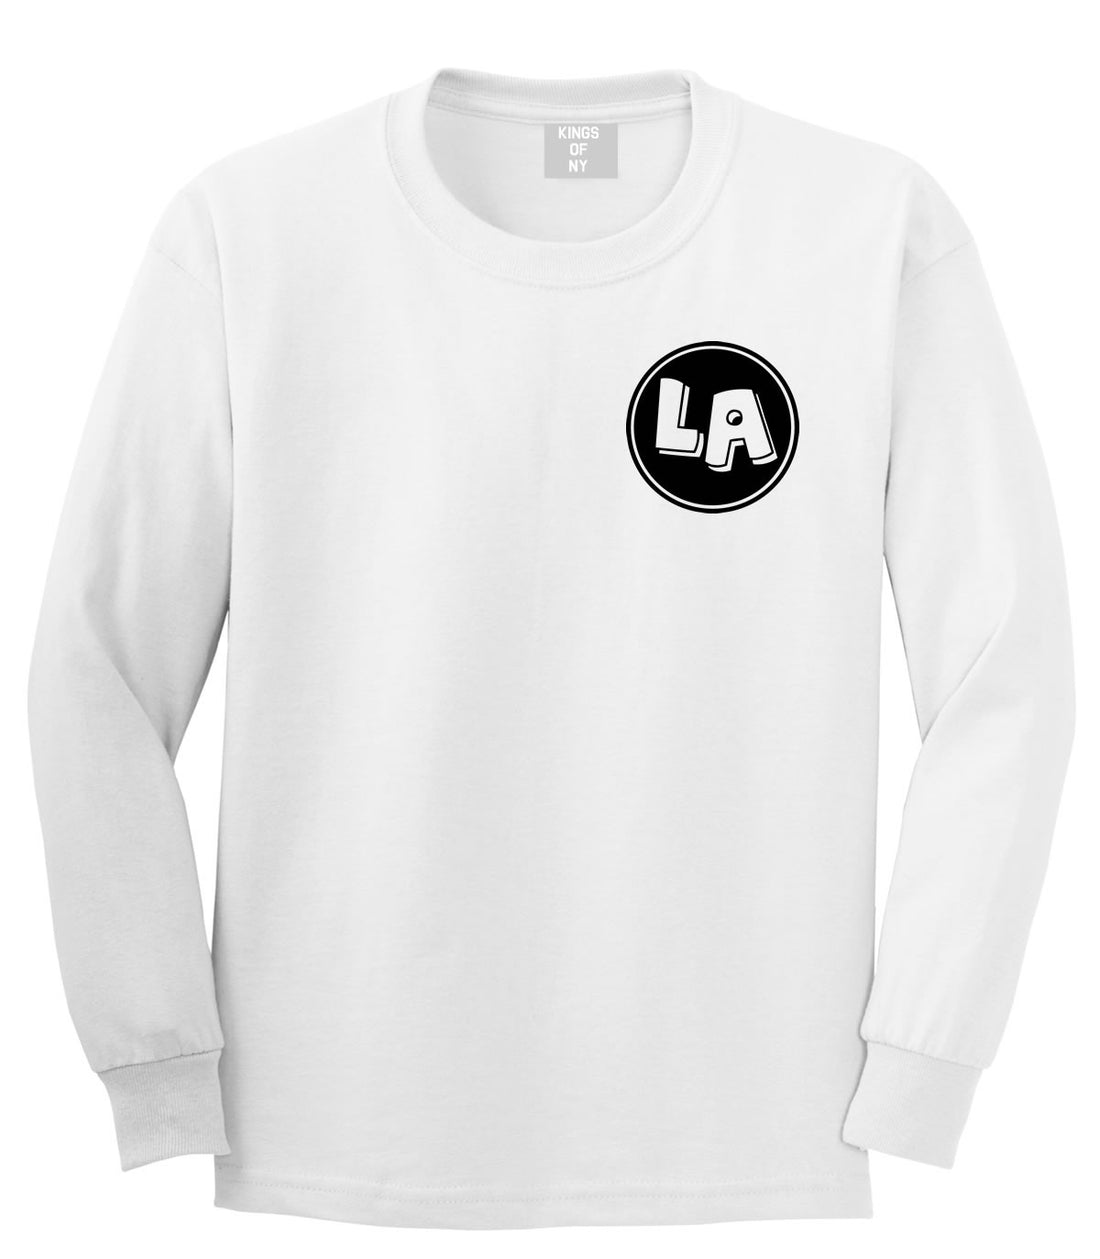 LA Circle Chest Los Angeles Long Sleeve T-Shirt in White By Kings Of NY